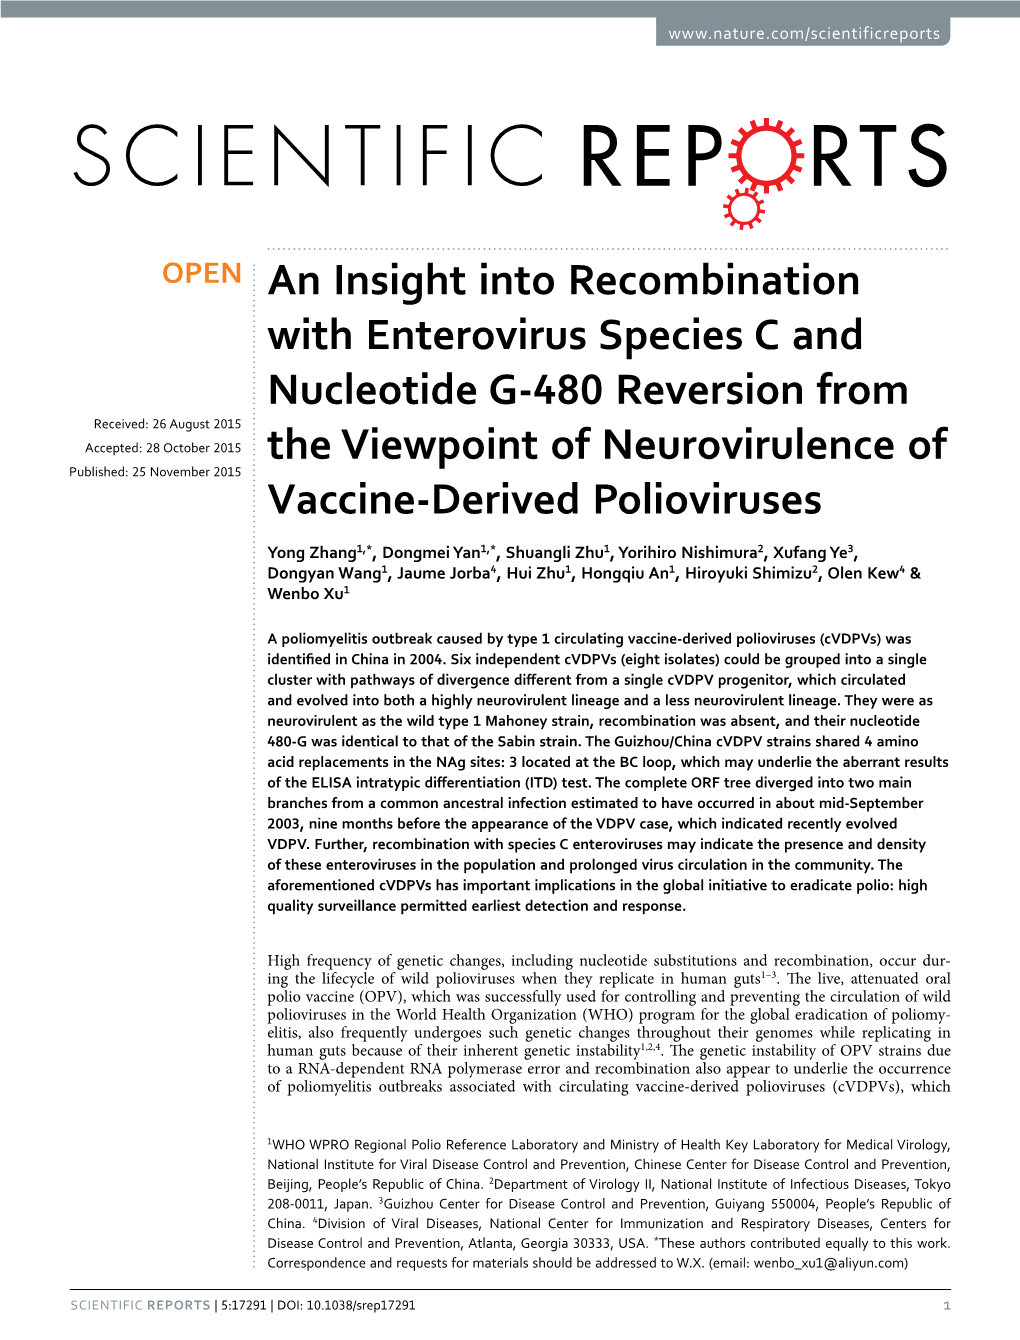 An Insight Into Recombination with Enterovirus Species C And